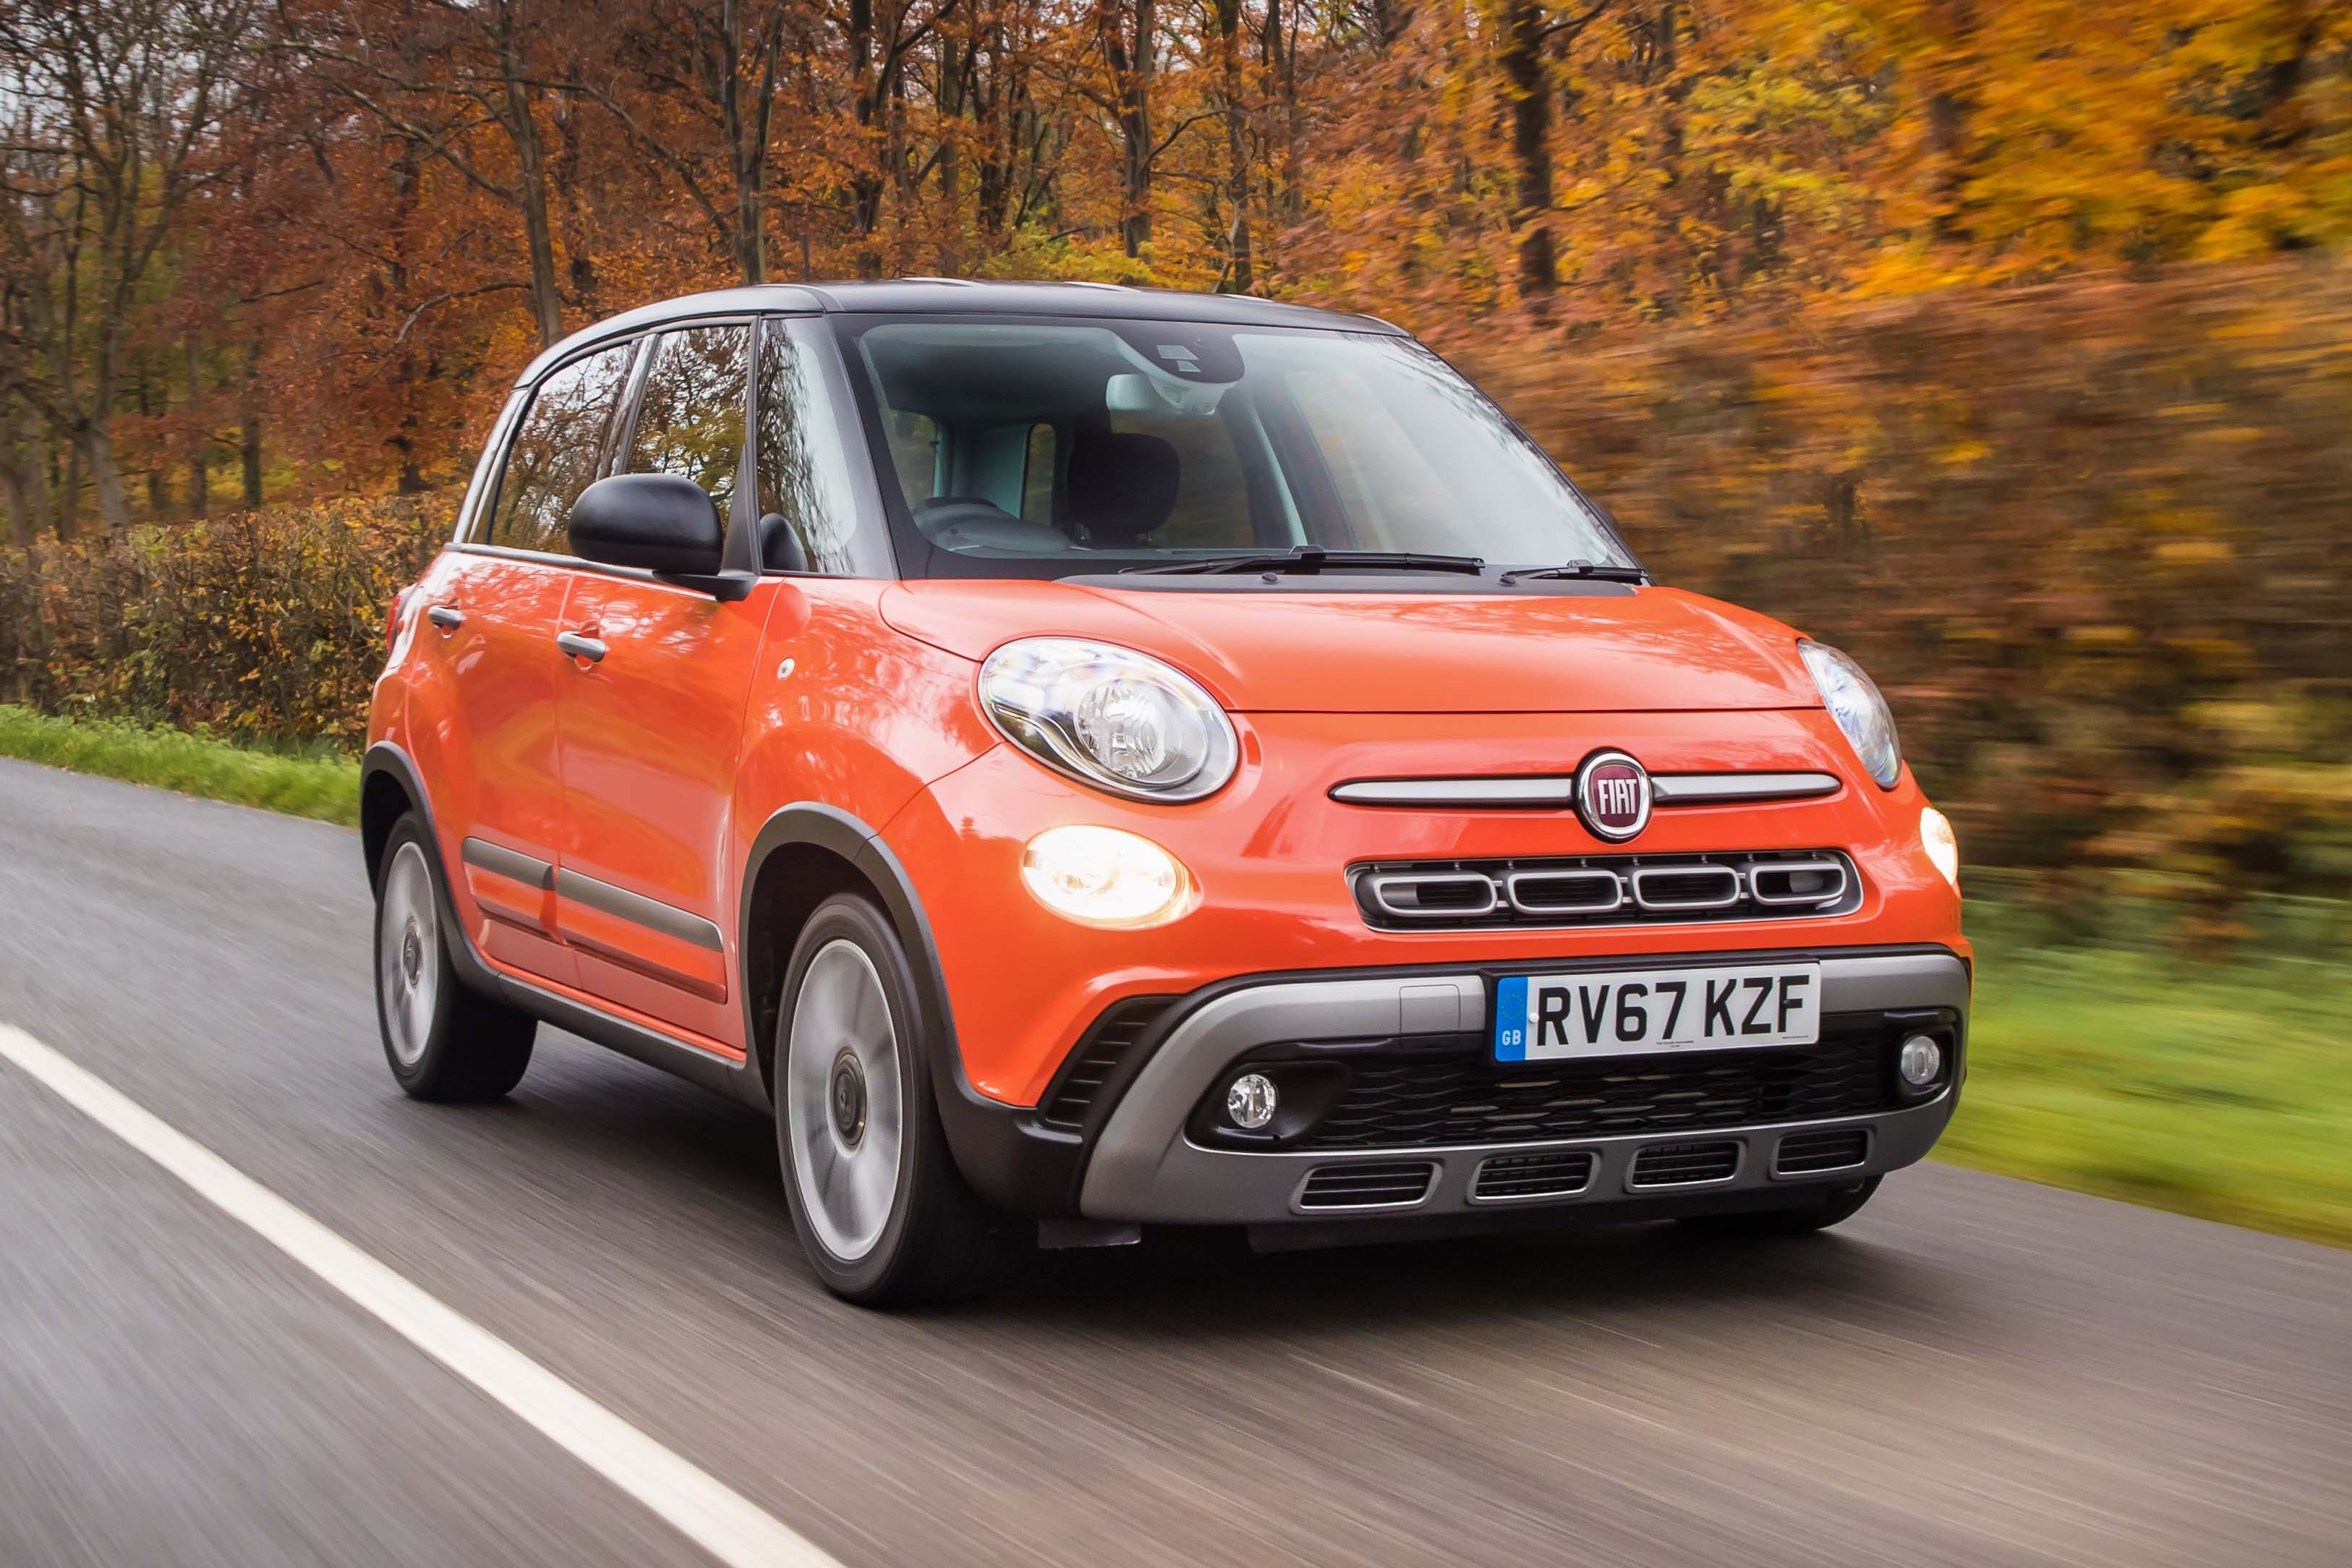 Fiat 500 USA: A Look at the Design of the New Fiat 500L